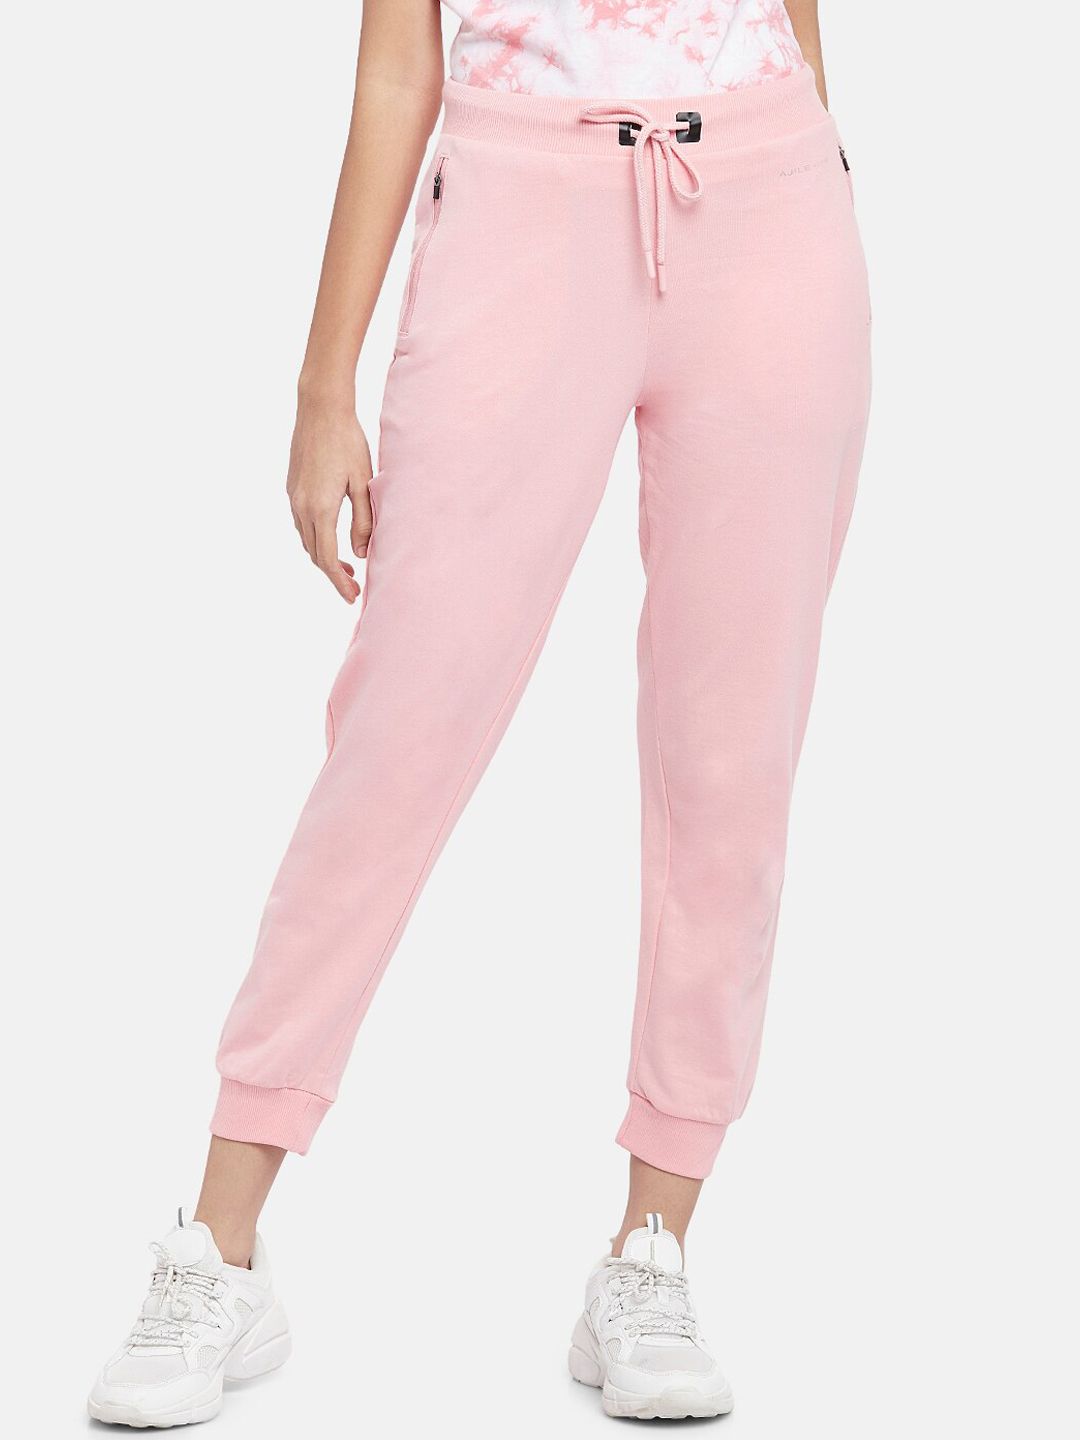 Ajile by Pantaloons Women Pink Joggers Trousers Price in India